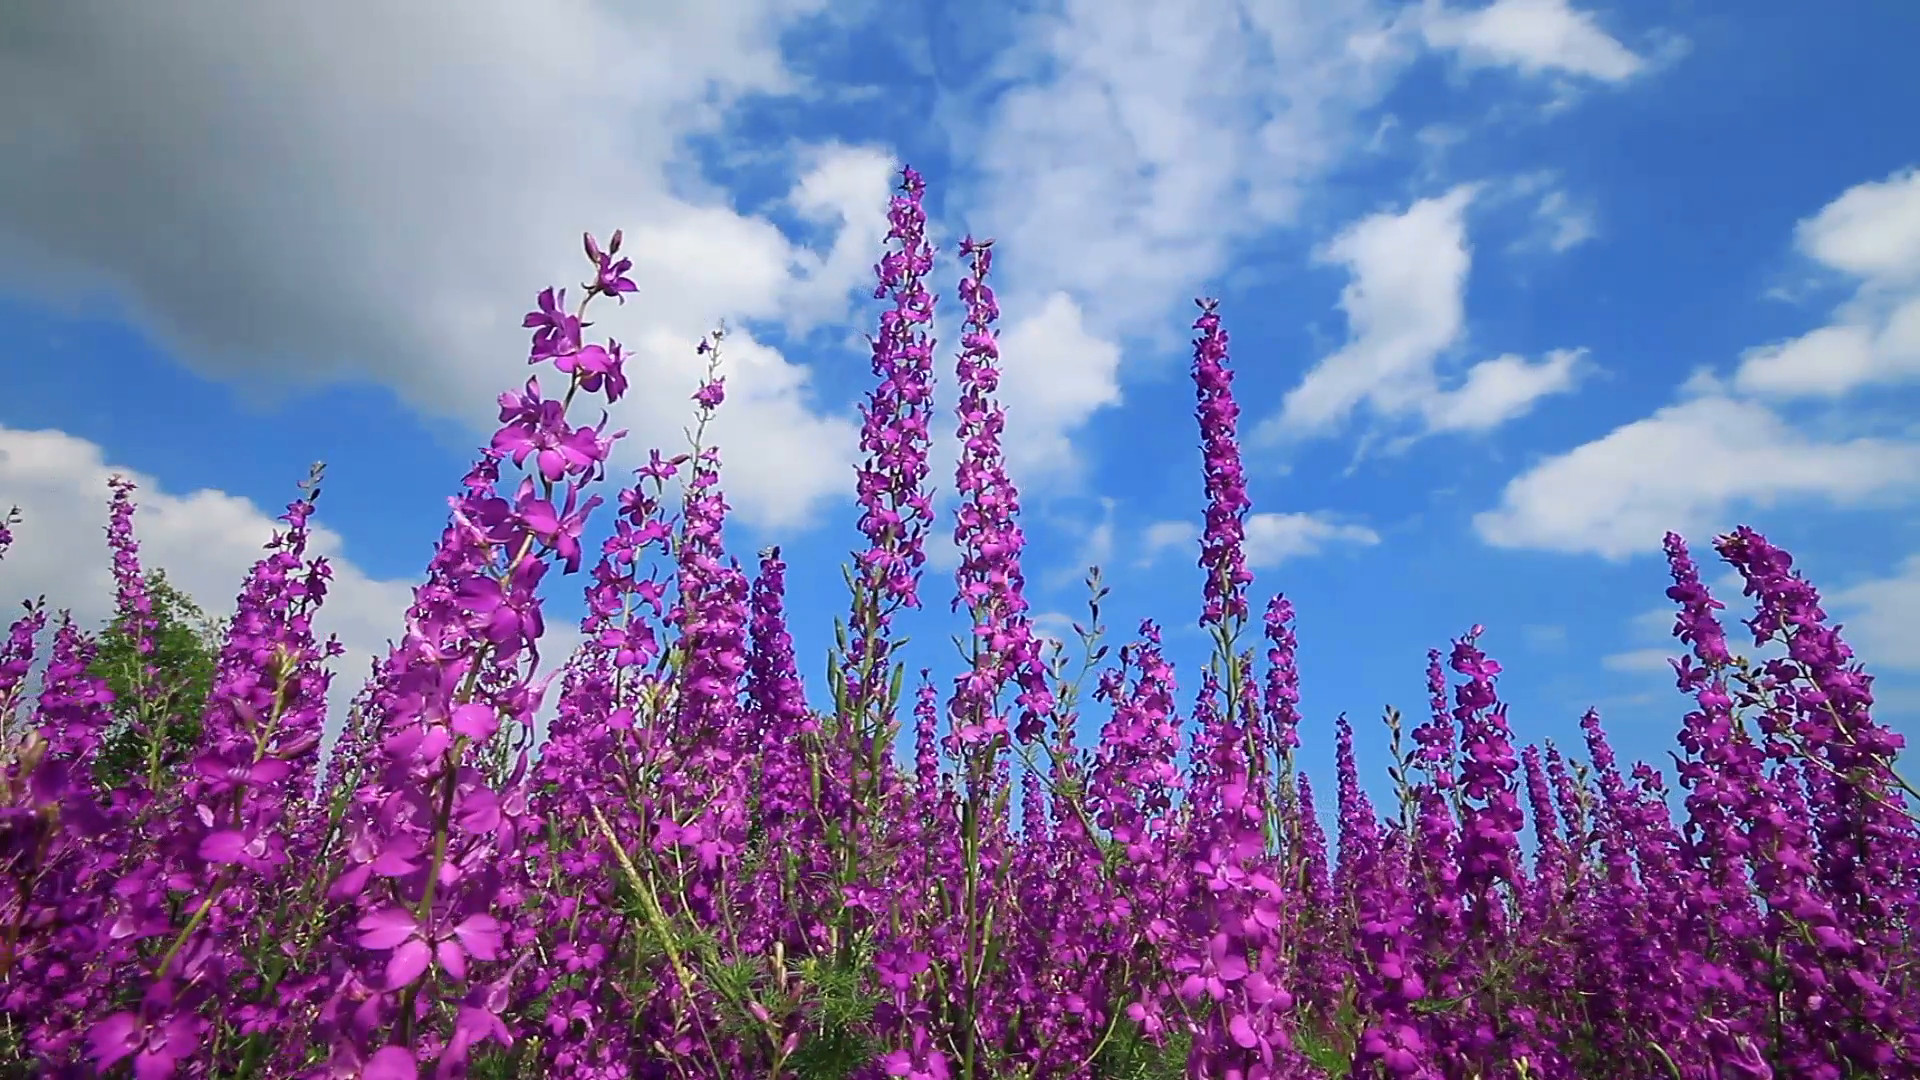 1920x1080 Subscription Library Field Of Pink Flowers And Blue Sky. Nature Background